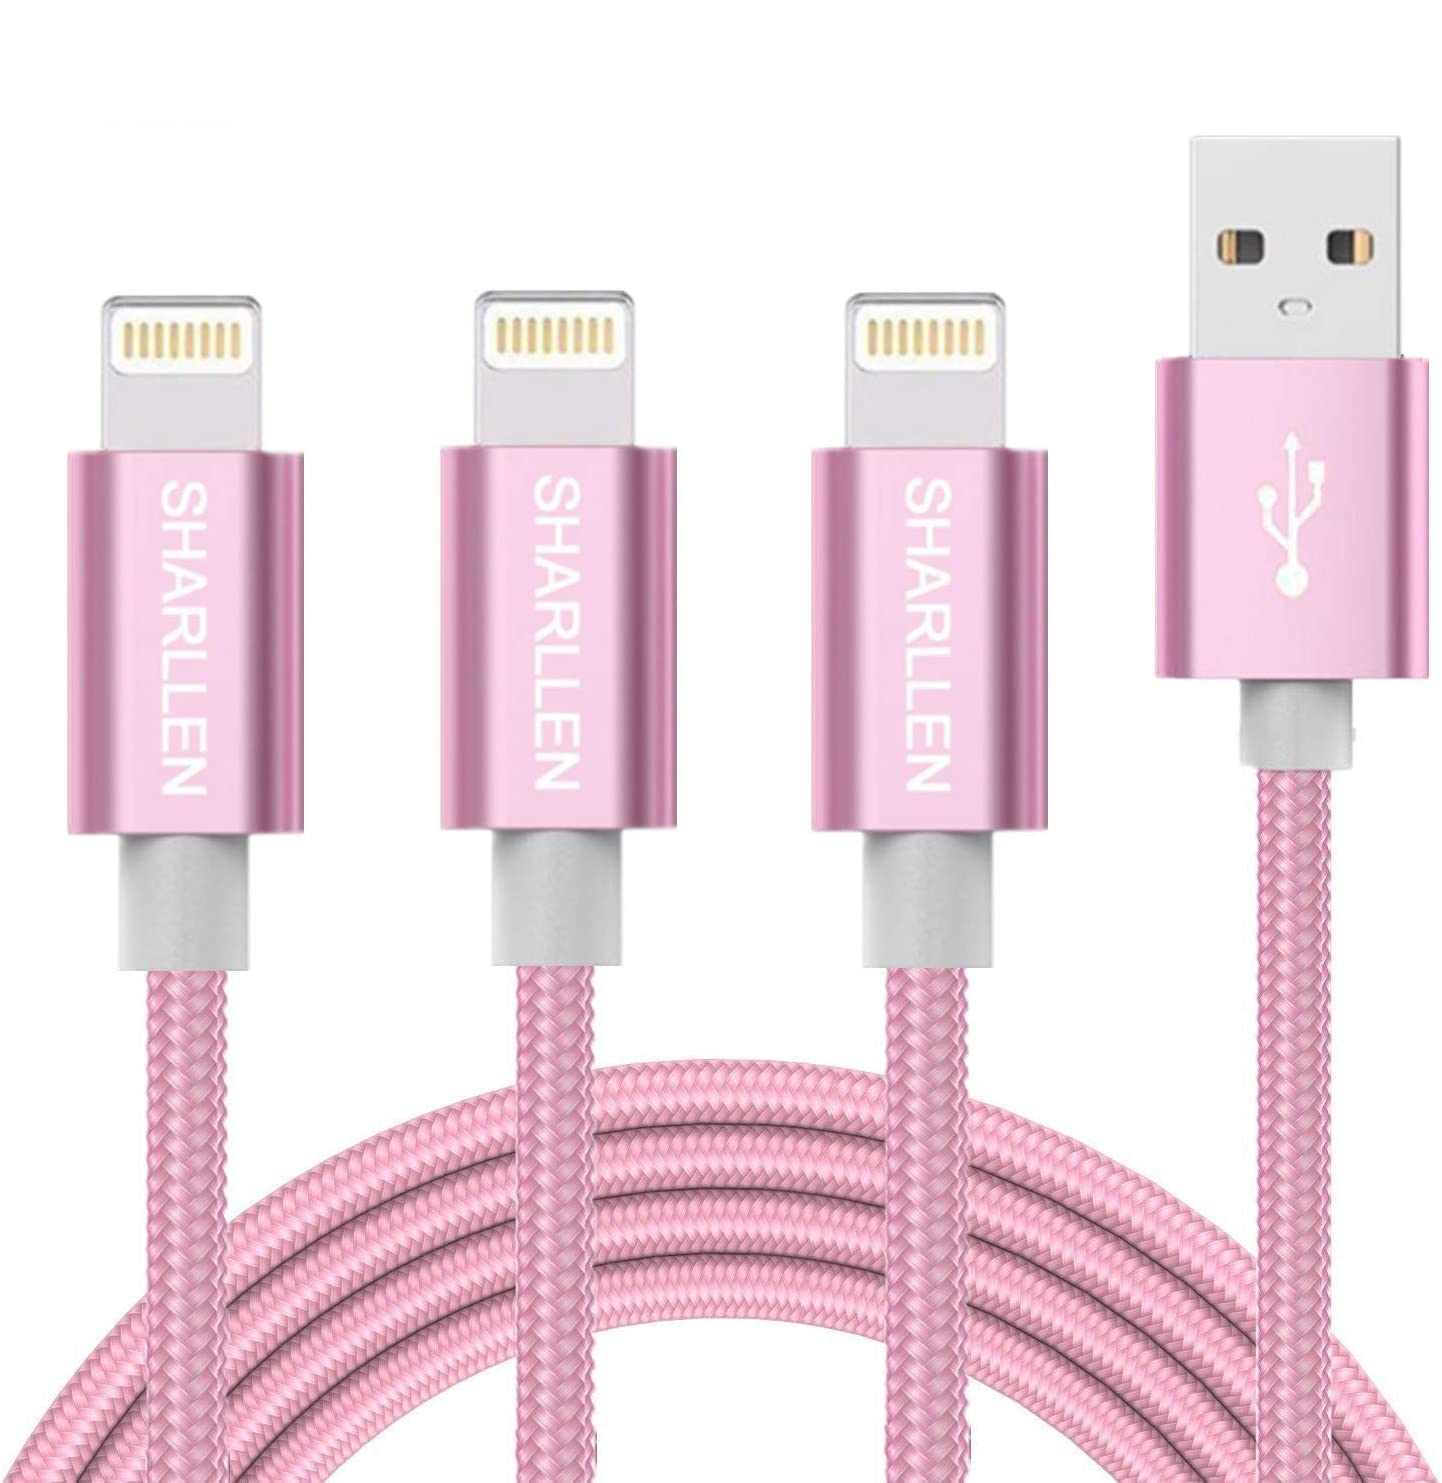 Book Cover iPhone Charging Cable,SHARLLEN 6/6/6FT MFi Certified Nylon Braided Lightning Cables Fast USB Charging&Syncing Cord Compatible iPhone Charger XS/Max/XR/X/8P/8/7/7P/6/iPad/iPod 3 Pack (Rose Gold 6FT)